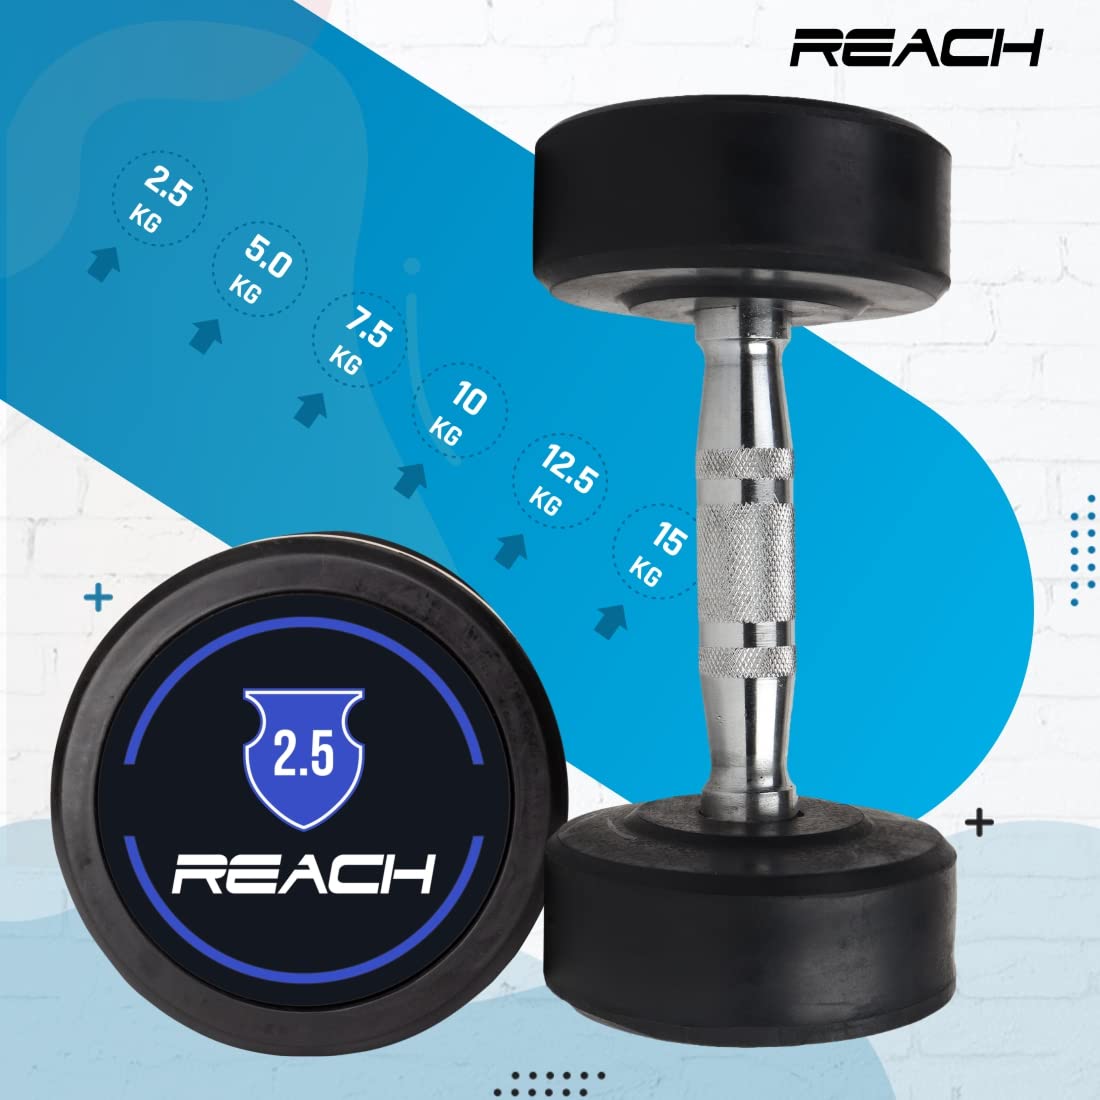 Reach Round Rubber Dumbbells 2.5 Kg Set of 2 for Men & Women | Gym Equipment Set for Home Gym Workout & Exercise | For Strength Training & Fitness Accessories & Tools (Fixed Dumbbells , Black)